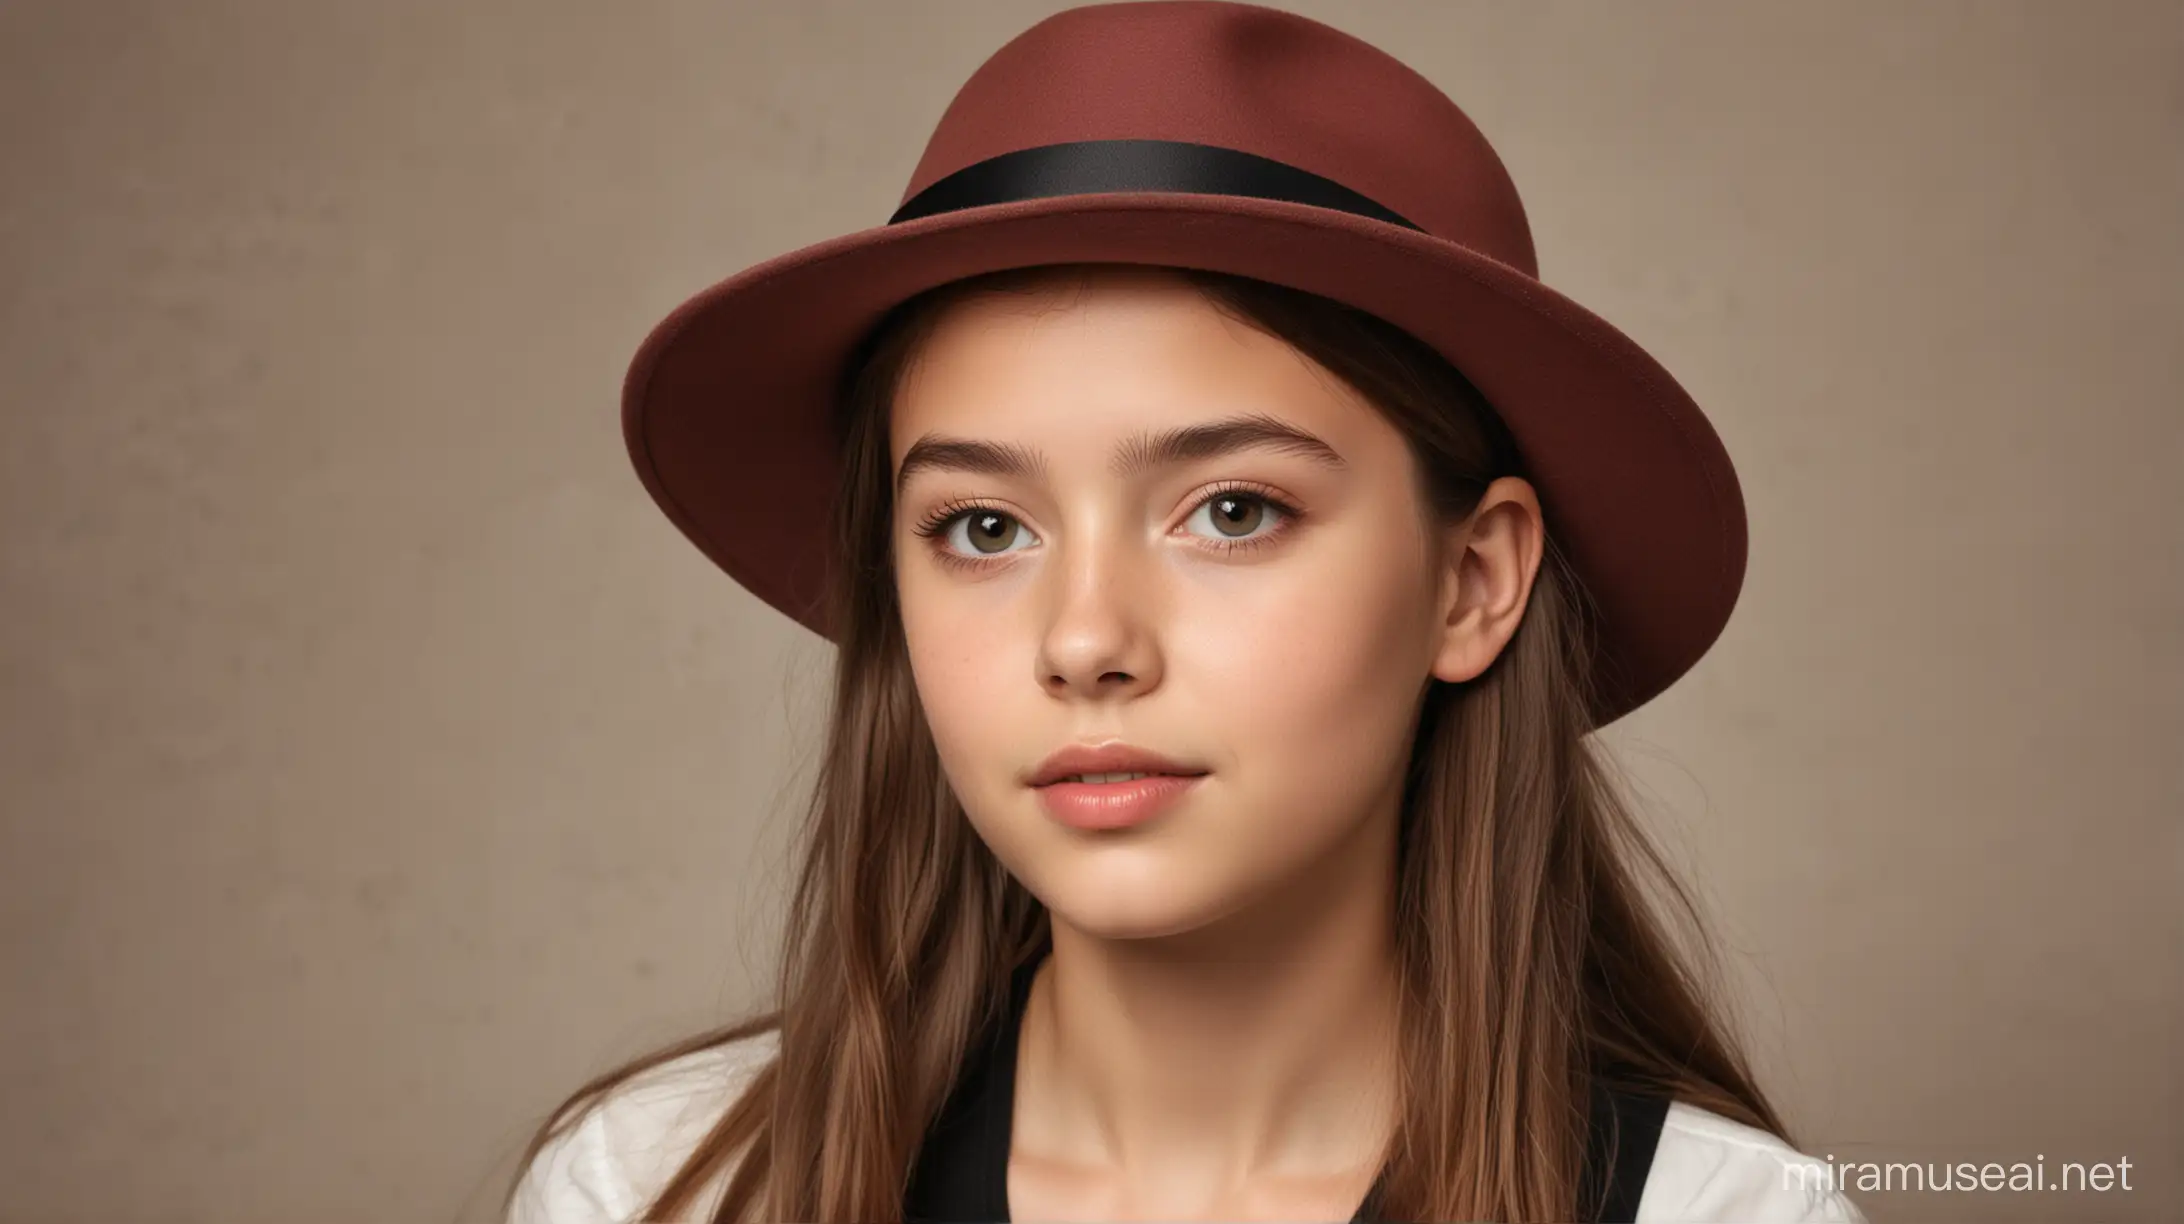 Adventurous Young Girl in Rosewood FlatBrimmed Hat with Wide Black Ribbon